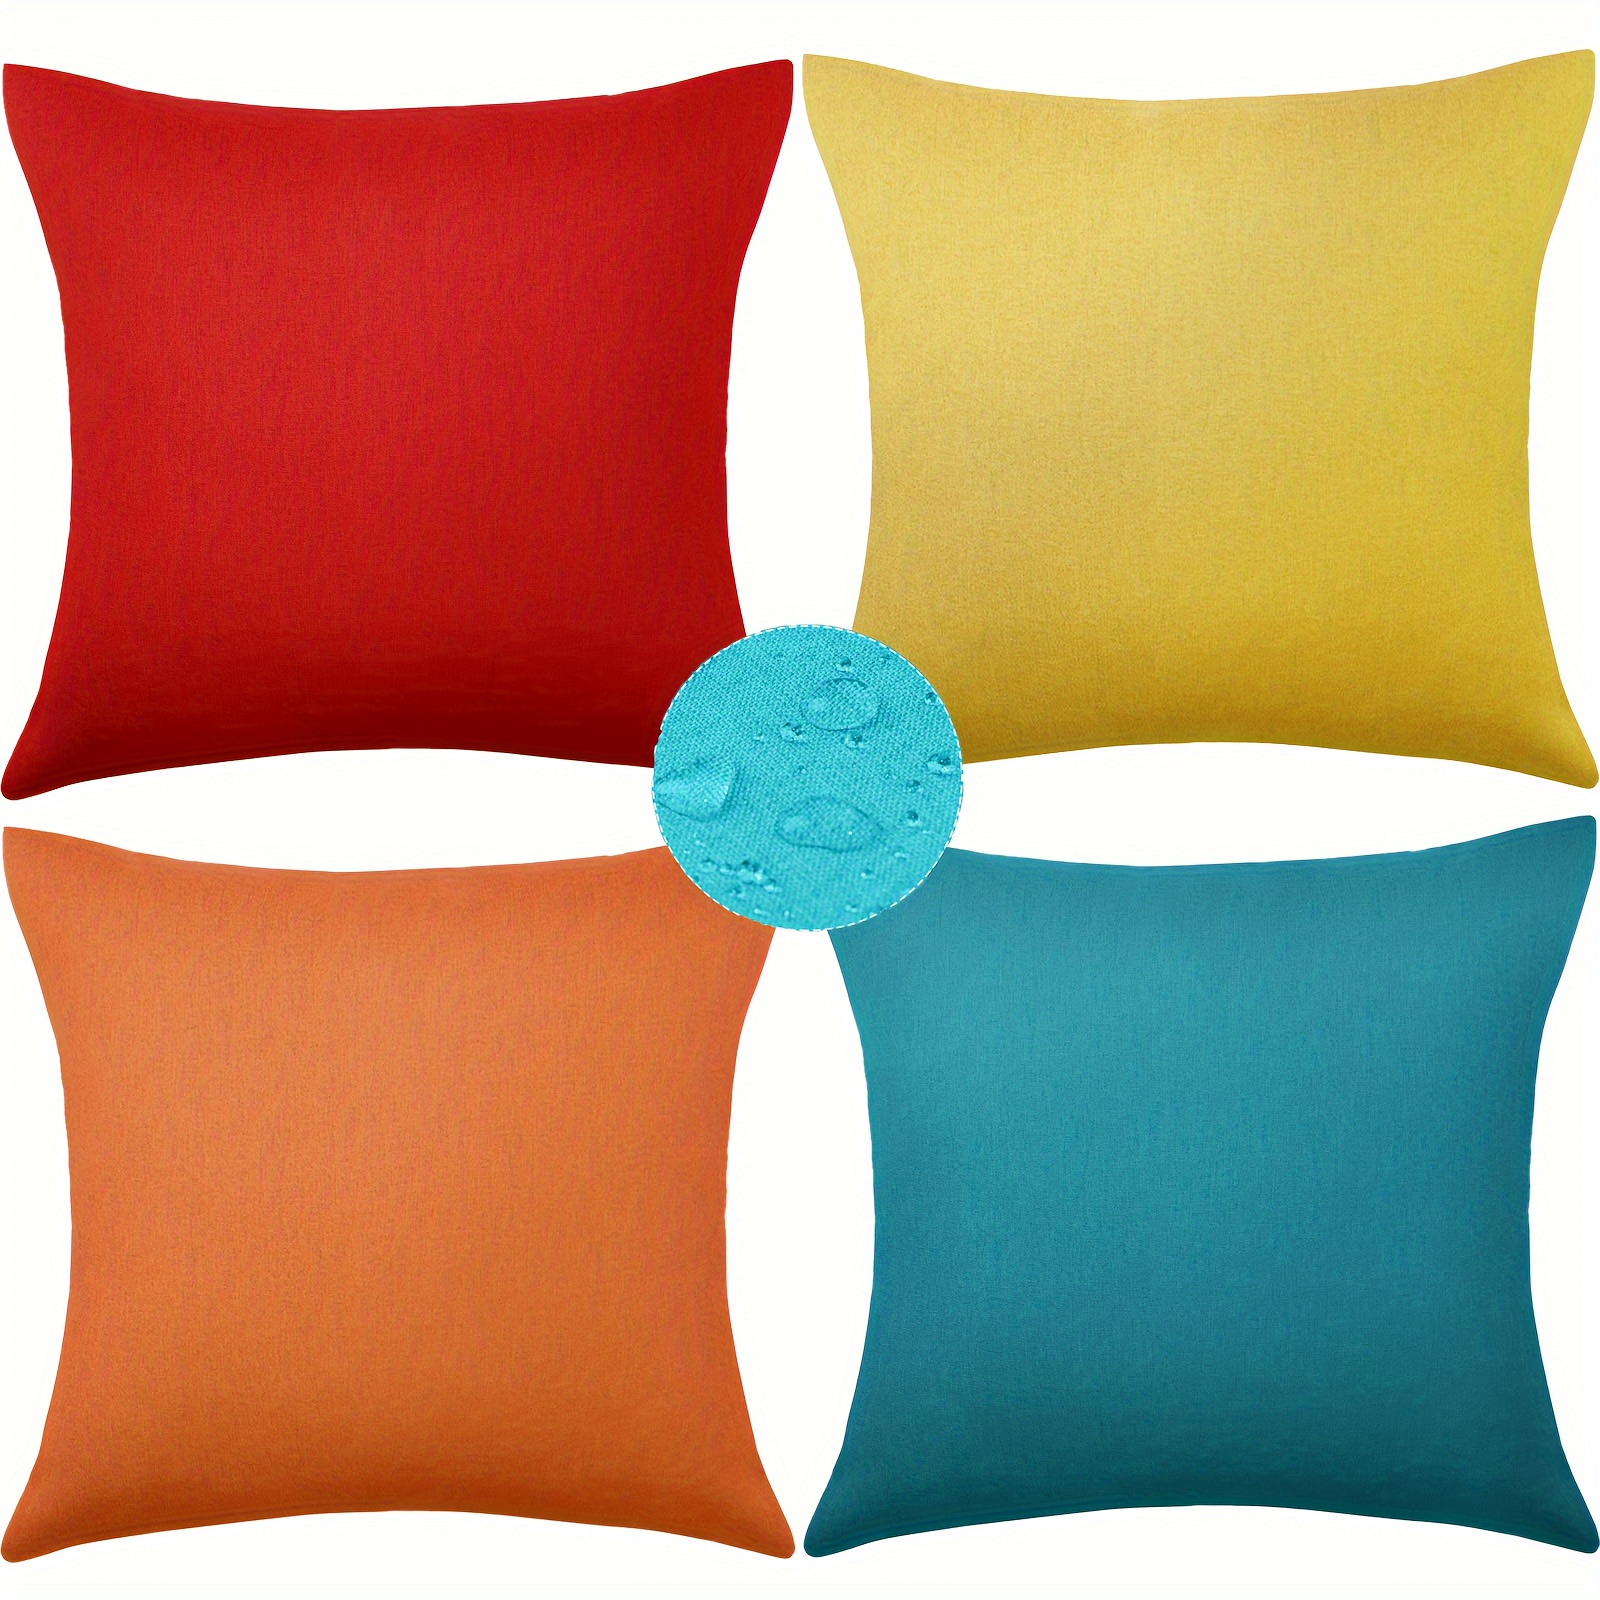 

Set Of 4 Waterproof Throw Pillow Covers - 18x18 Inch, Decorative Square Cushion Cases With Zipper For Patio, Balcony & Garden - Durable Pu Coated Polyester, Easy Care